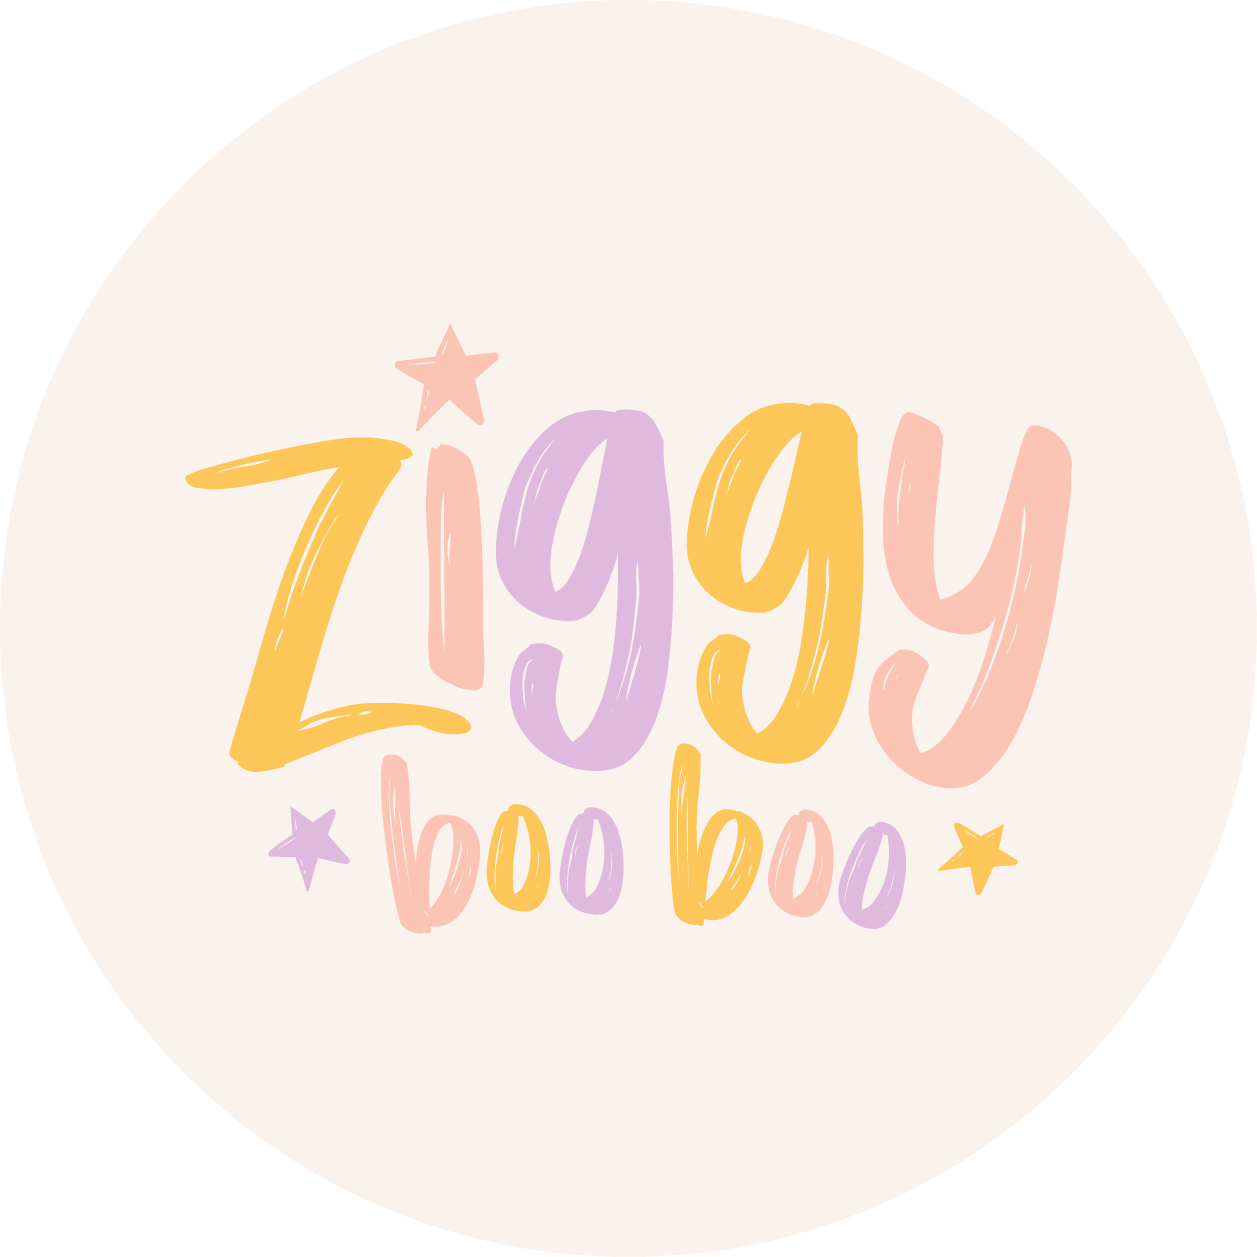 ZIGGY BOO BOO | Online Boutique for Baby, Kids & Mama